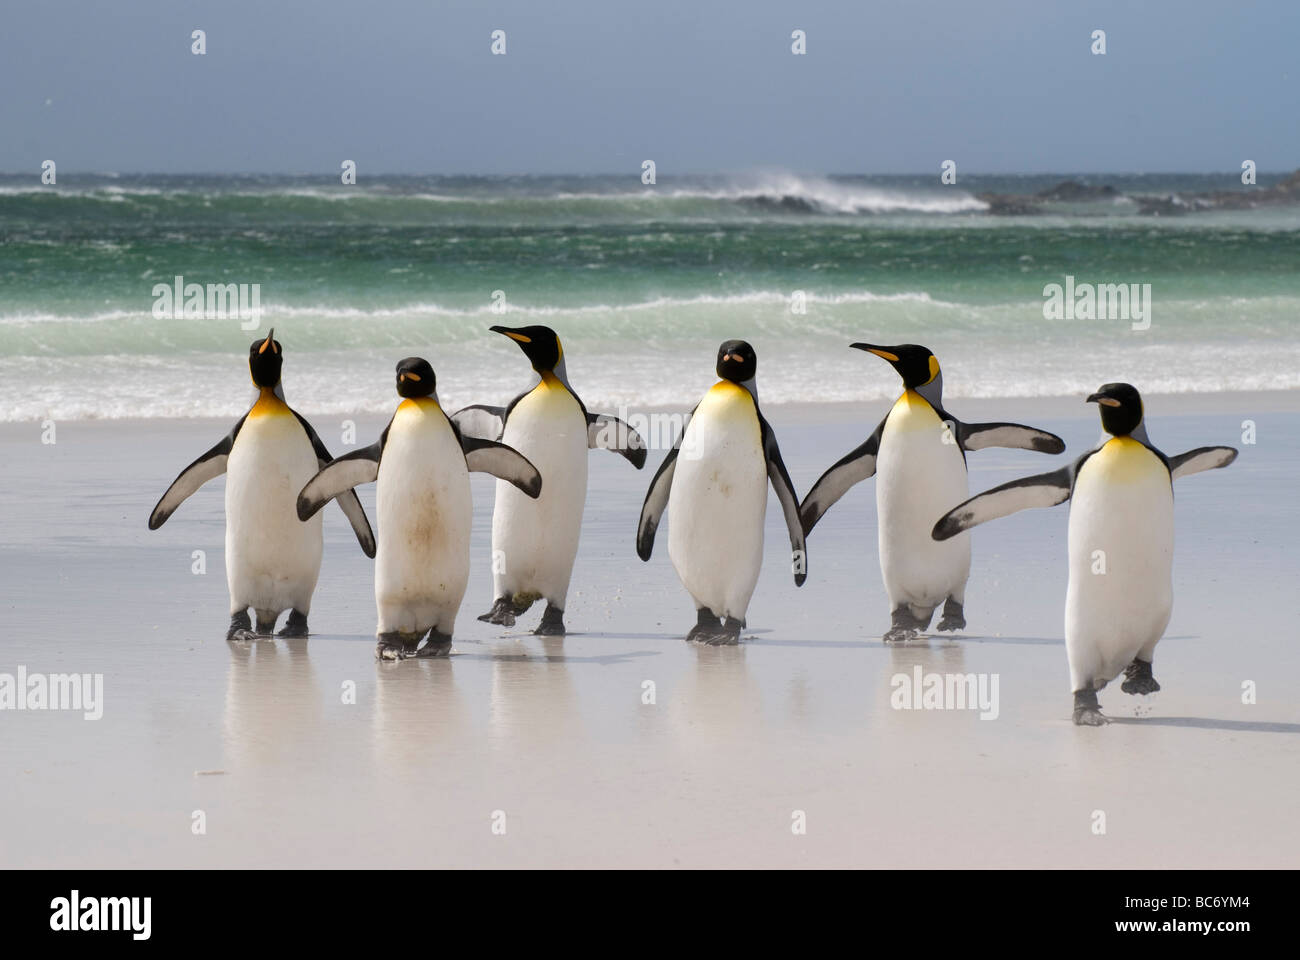 A group of King Penguins, Aptenodytes patagonicus, walking up the beach out of the sea Stock Photo